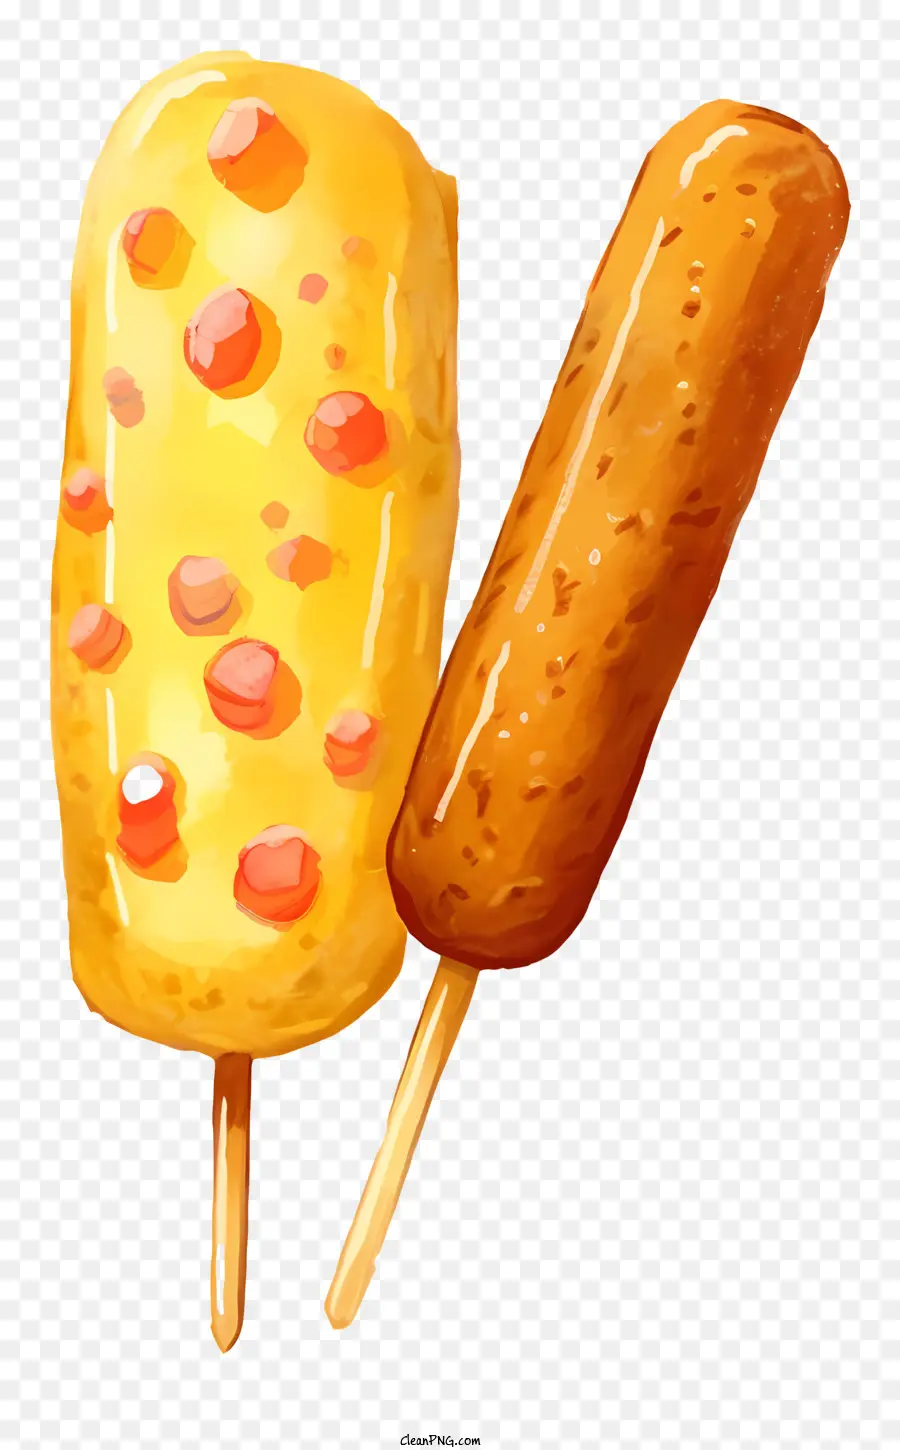 food on sticks hot dog on a stick slice of pizza on a stick cheese on top of food black background